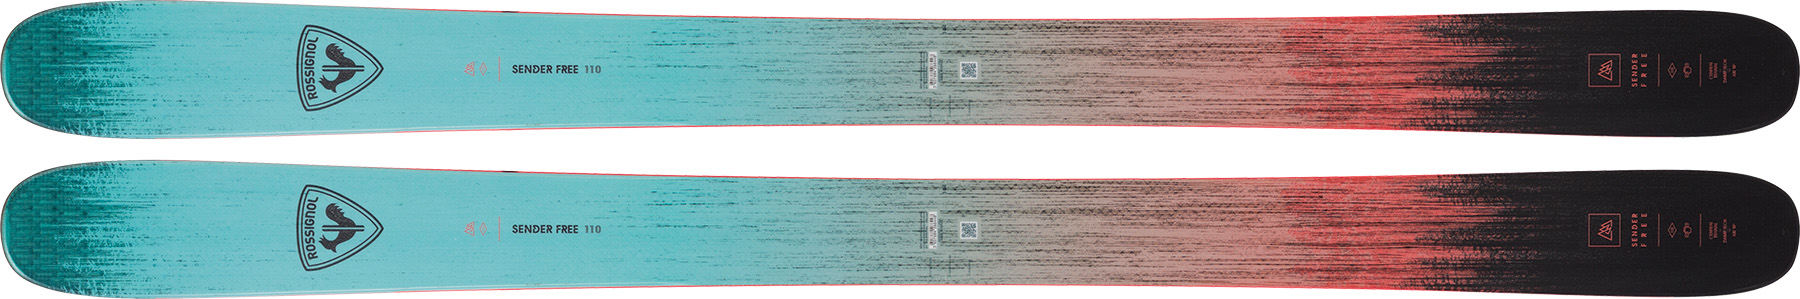 BLISTER 2023-2024 Reviewer Ski Quiver Selections